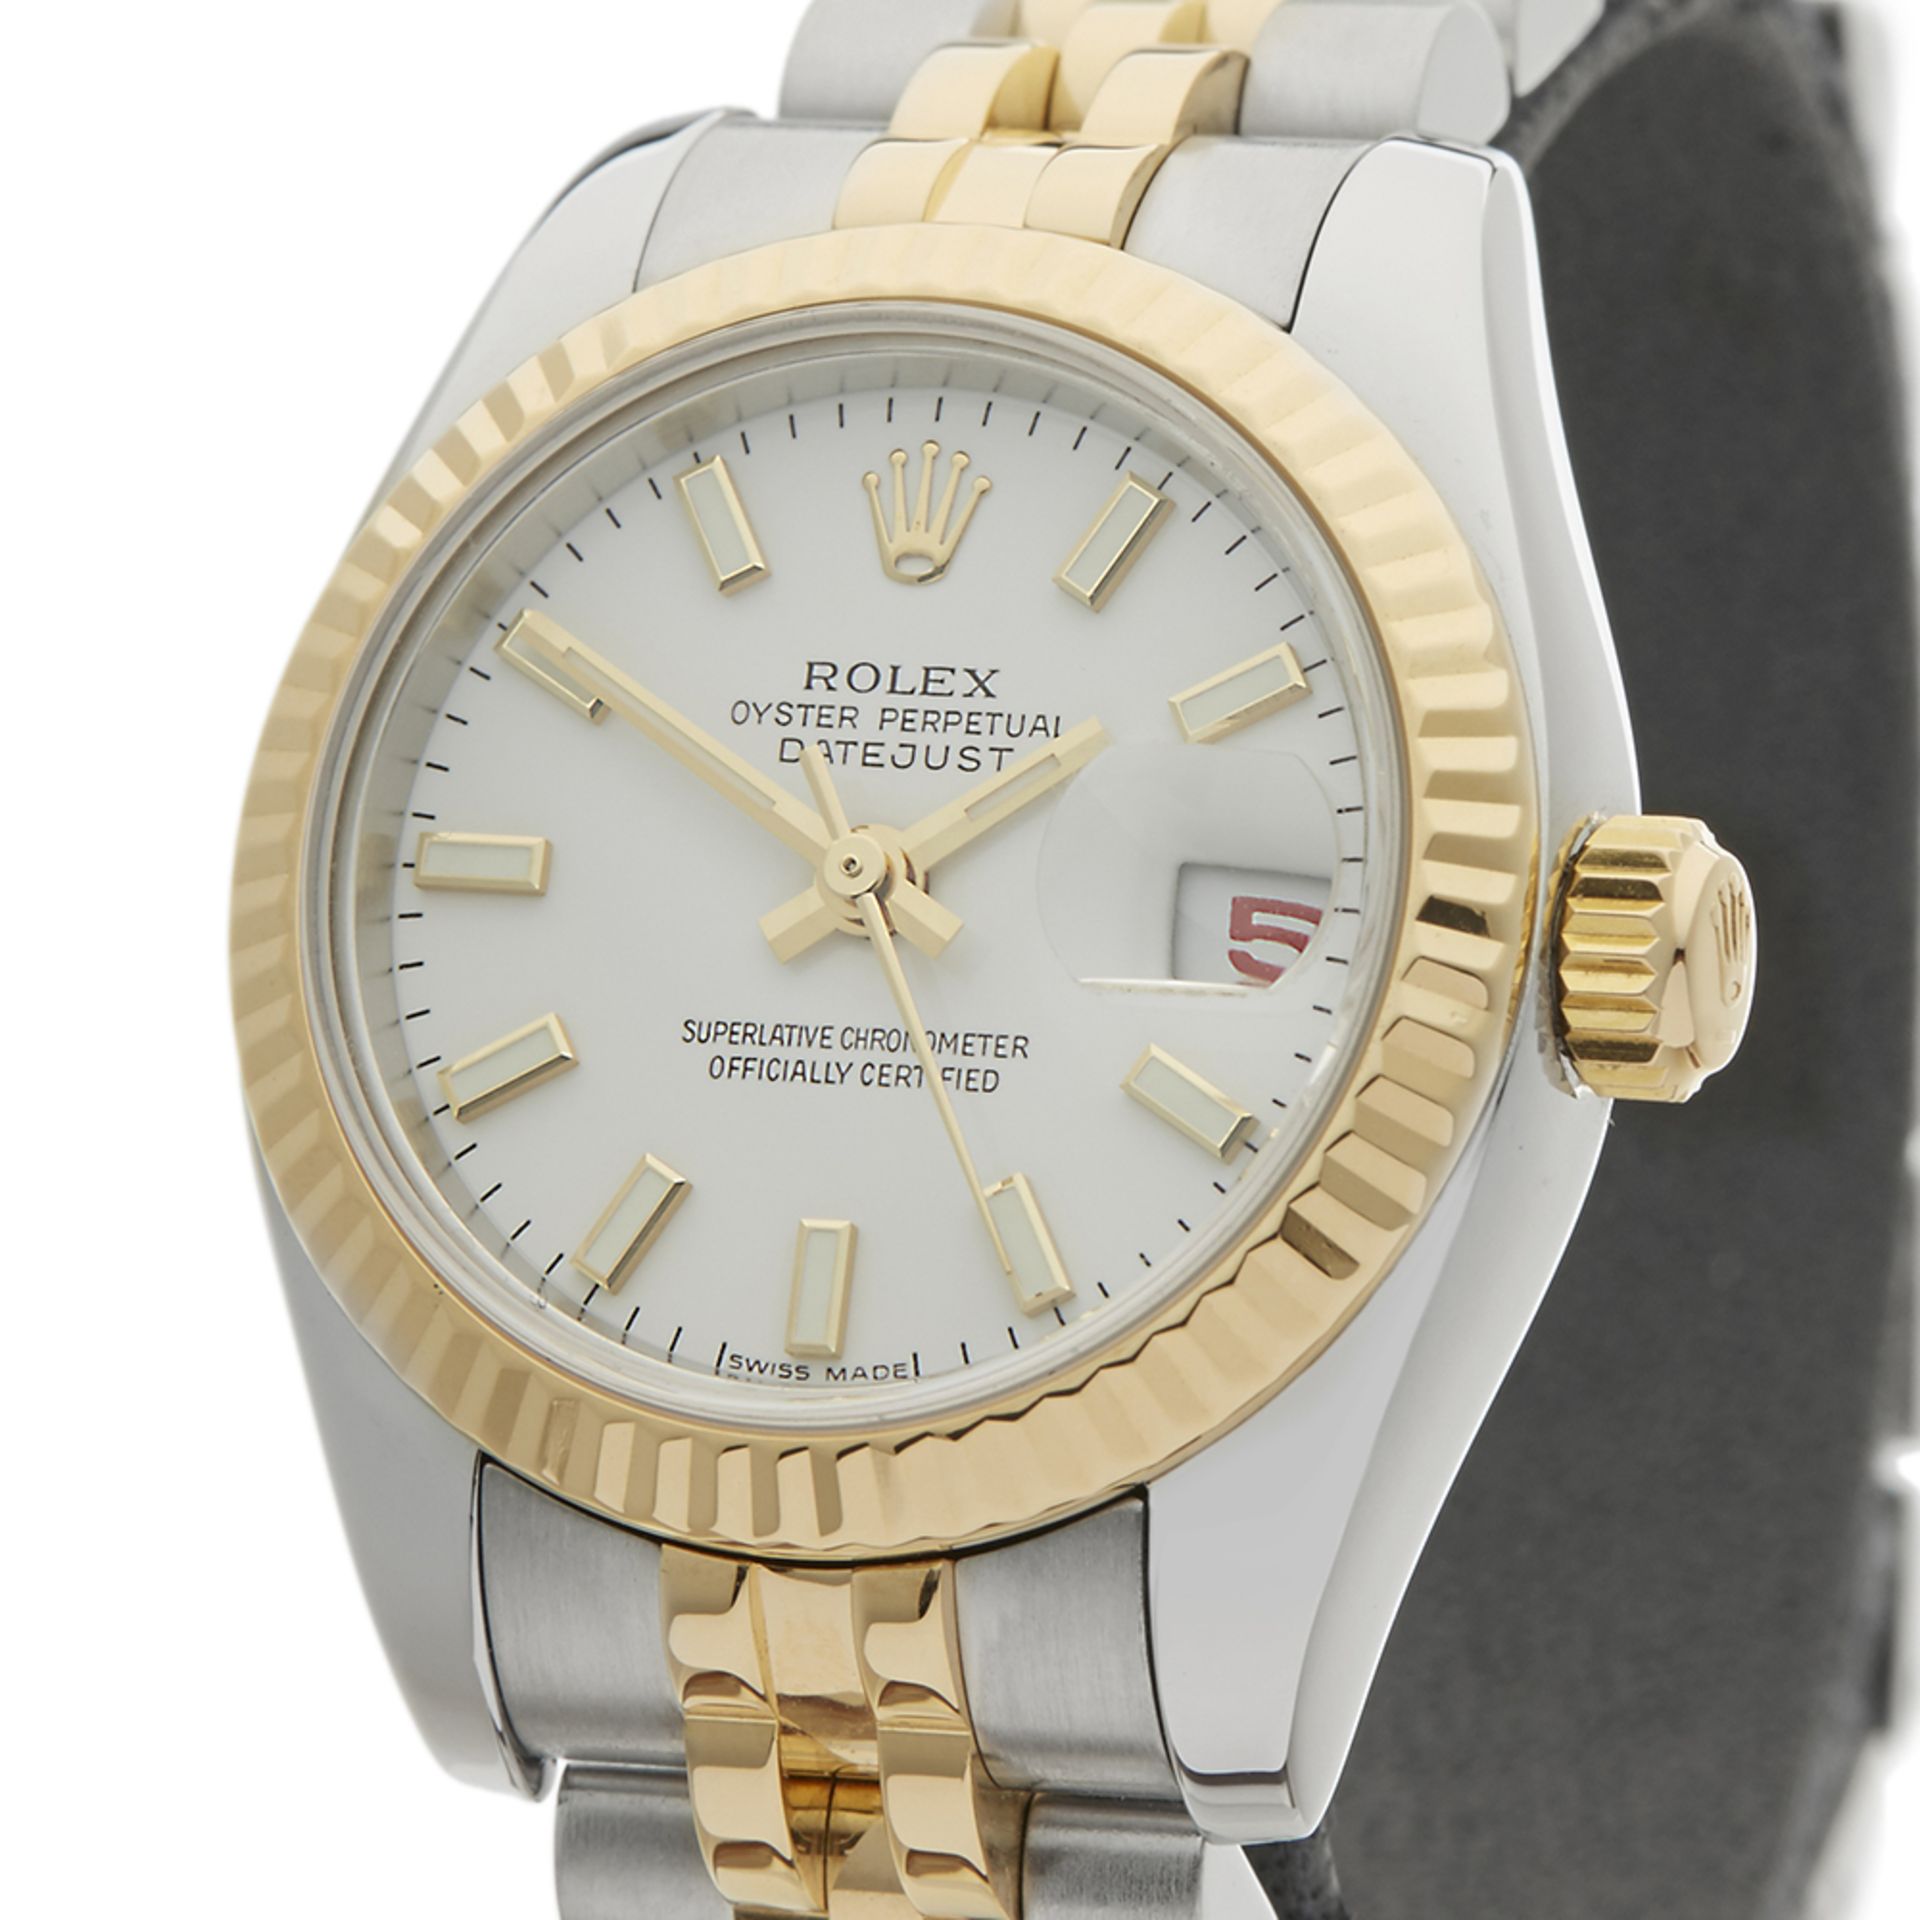 Datejust 26mm Stainless Steel & 18K Yellow Gold - 179173